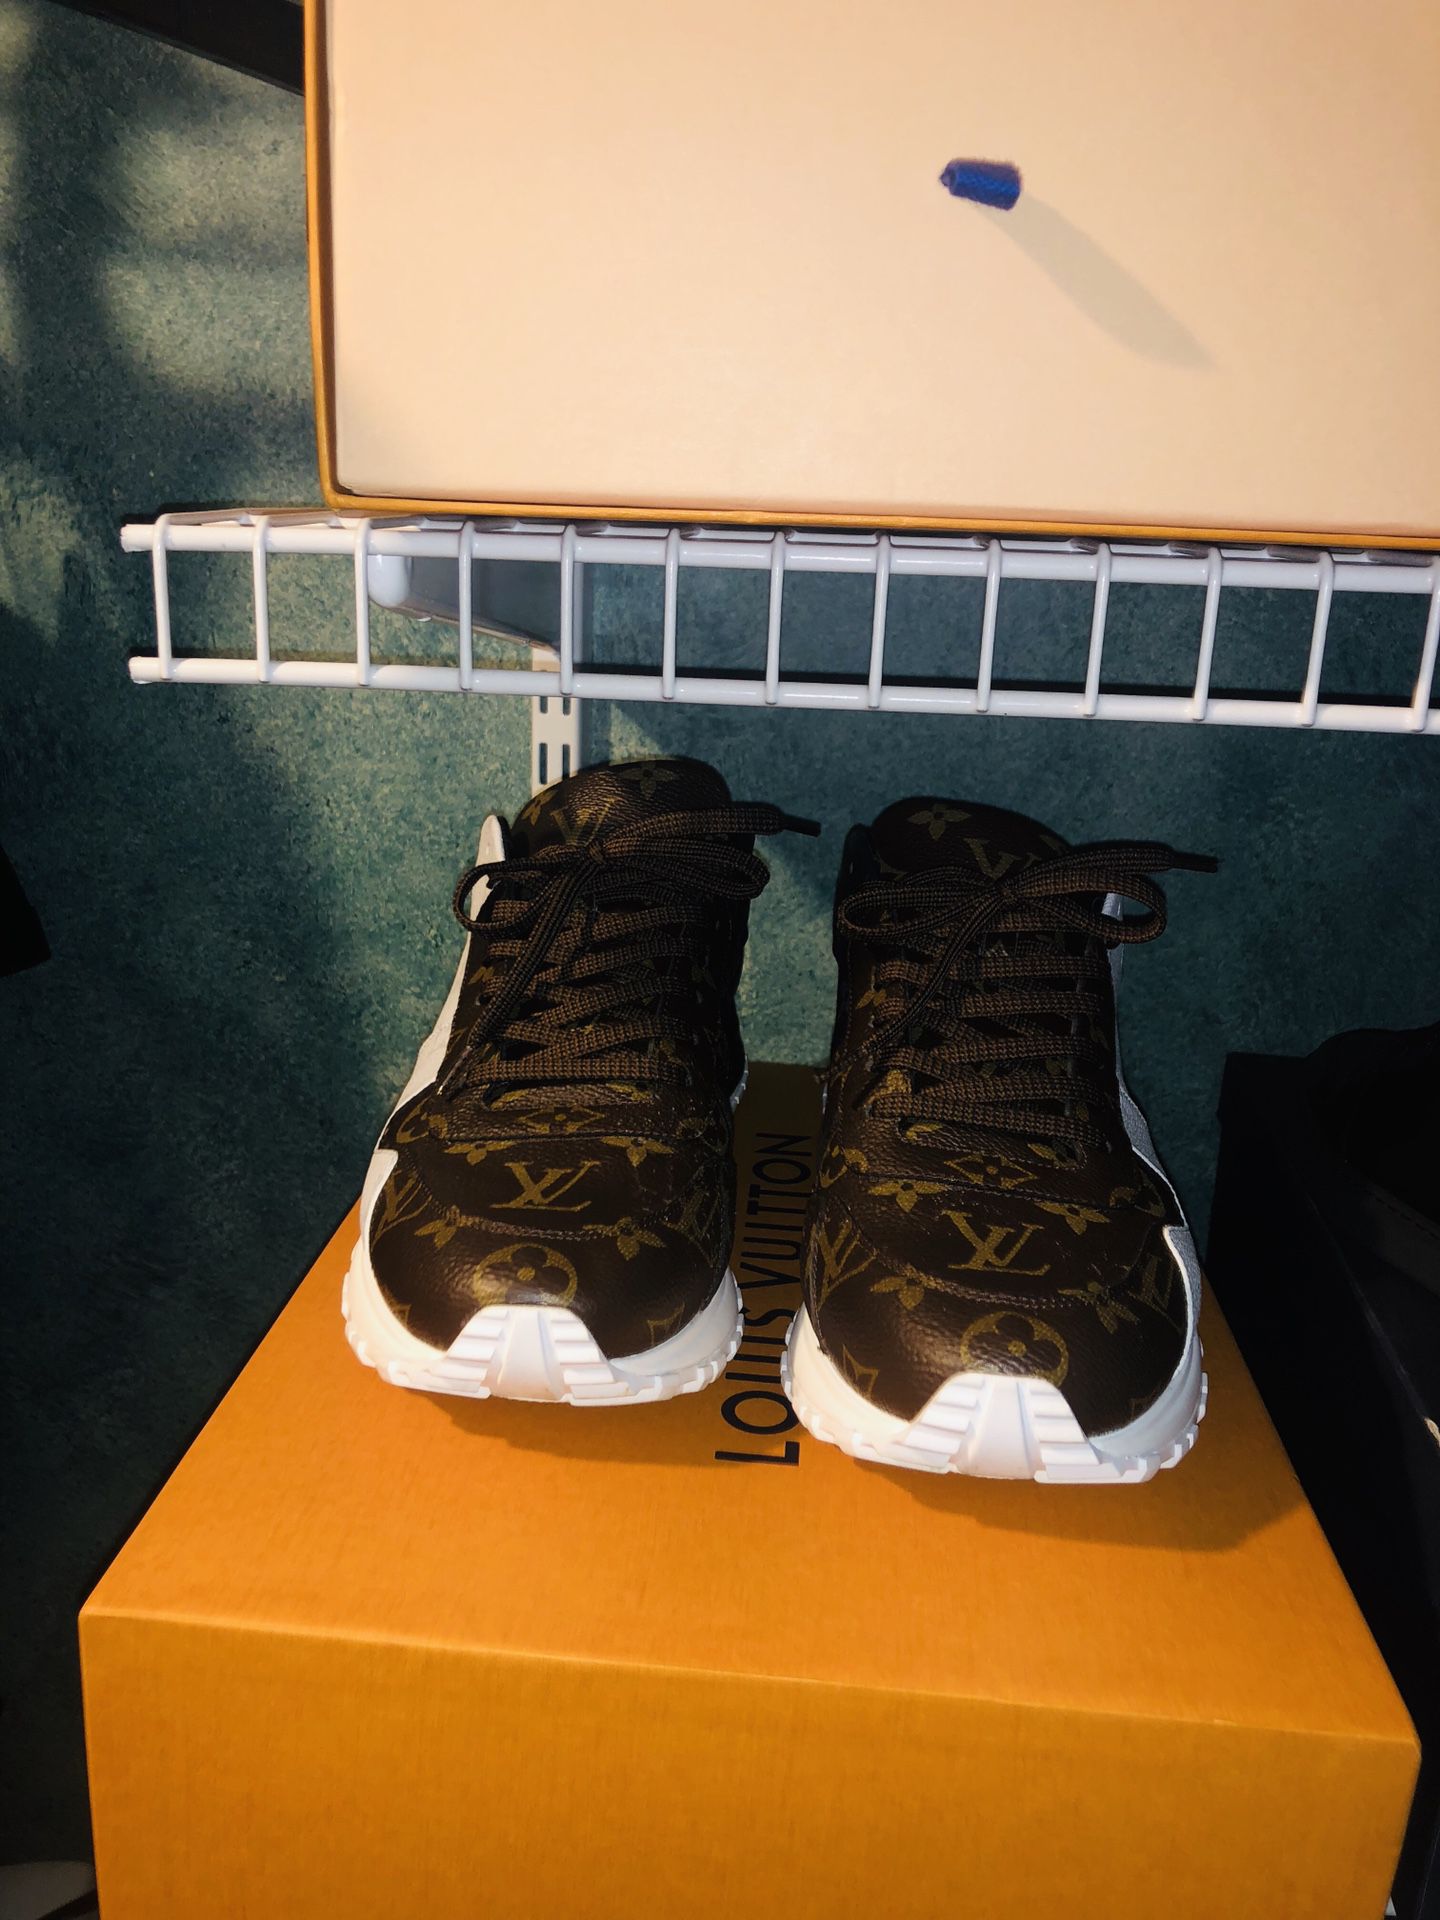 louis vuitton Time Out Sneaker for Sale in Boca Raton, FL - OfferUp